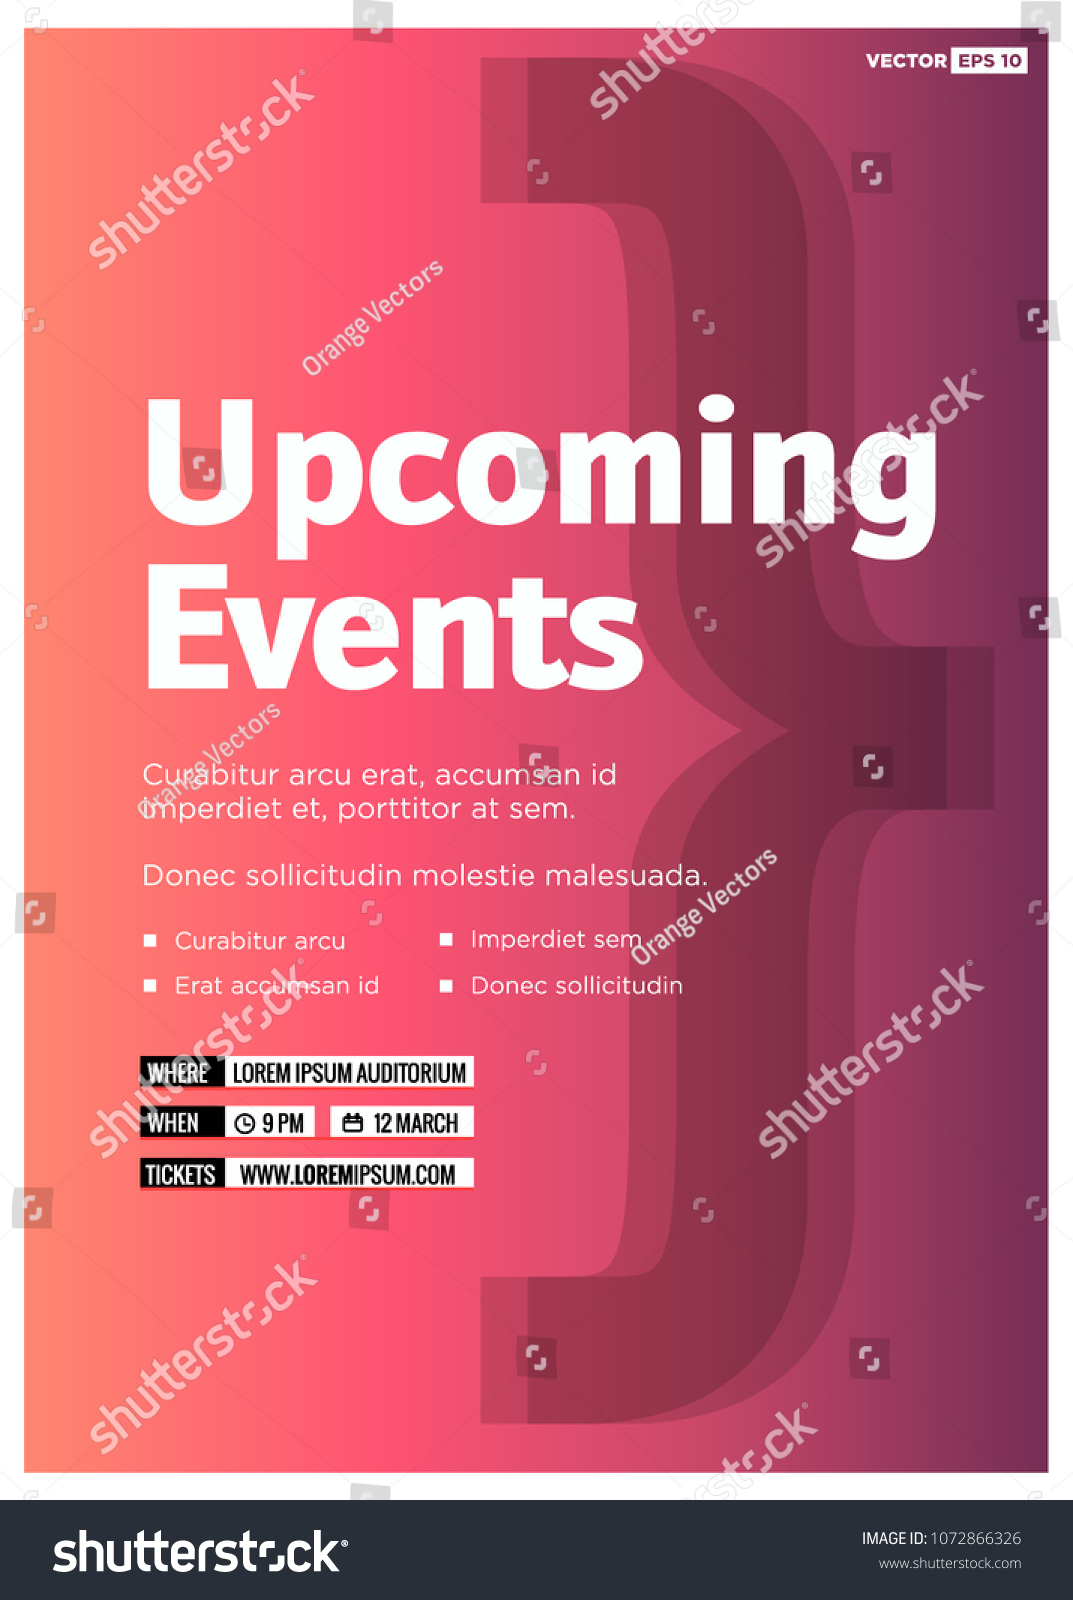 Upcoming Event Flyer Template from image.shutterstock.com